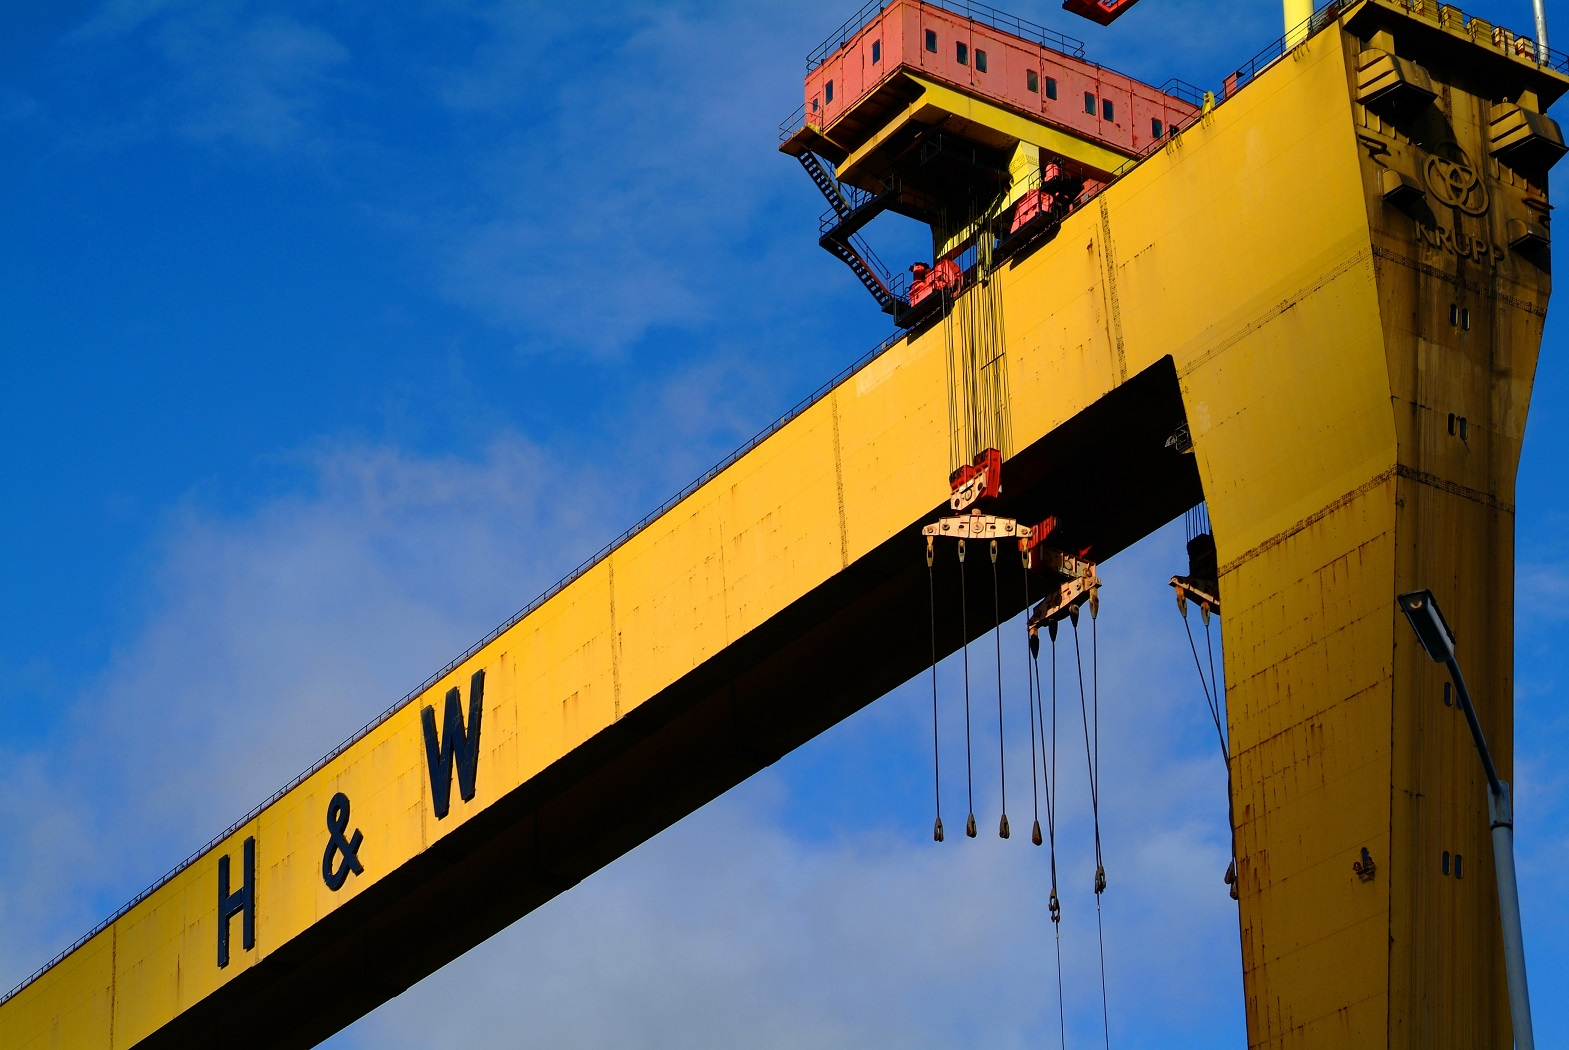 Harland and Wolff Crane found the Maritime Mile in Belfast